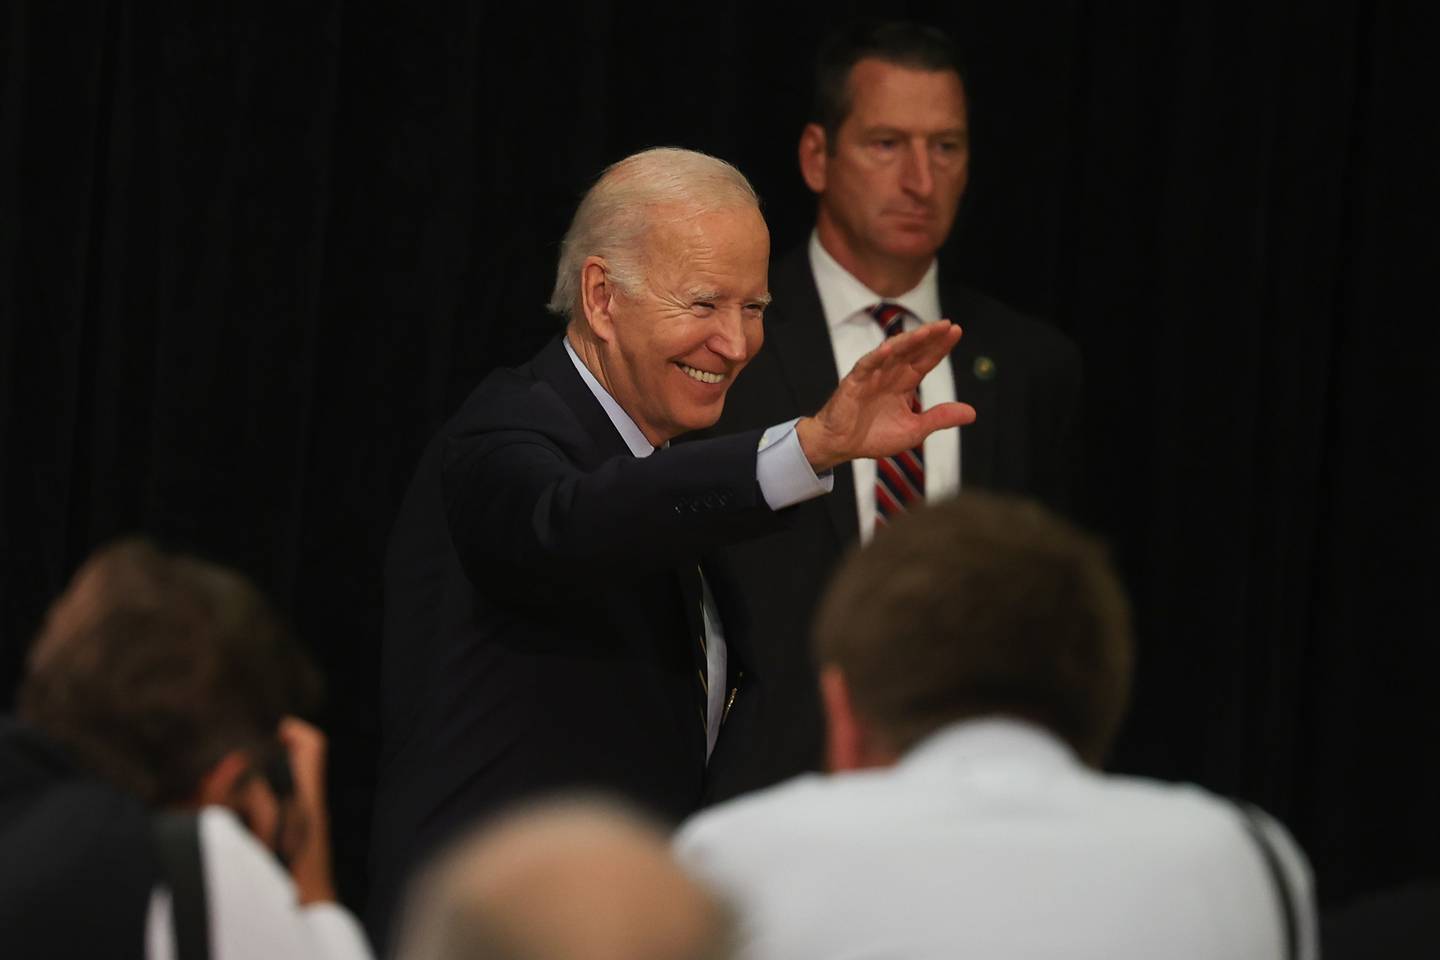 President Joe Biden waves as he exits after speaking about Social Security and Medicare during a stop in Joliet at Jones Elementary School on Saturday.